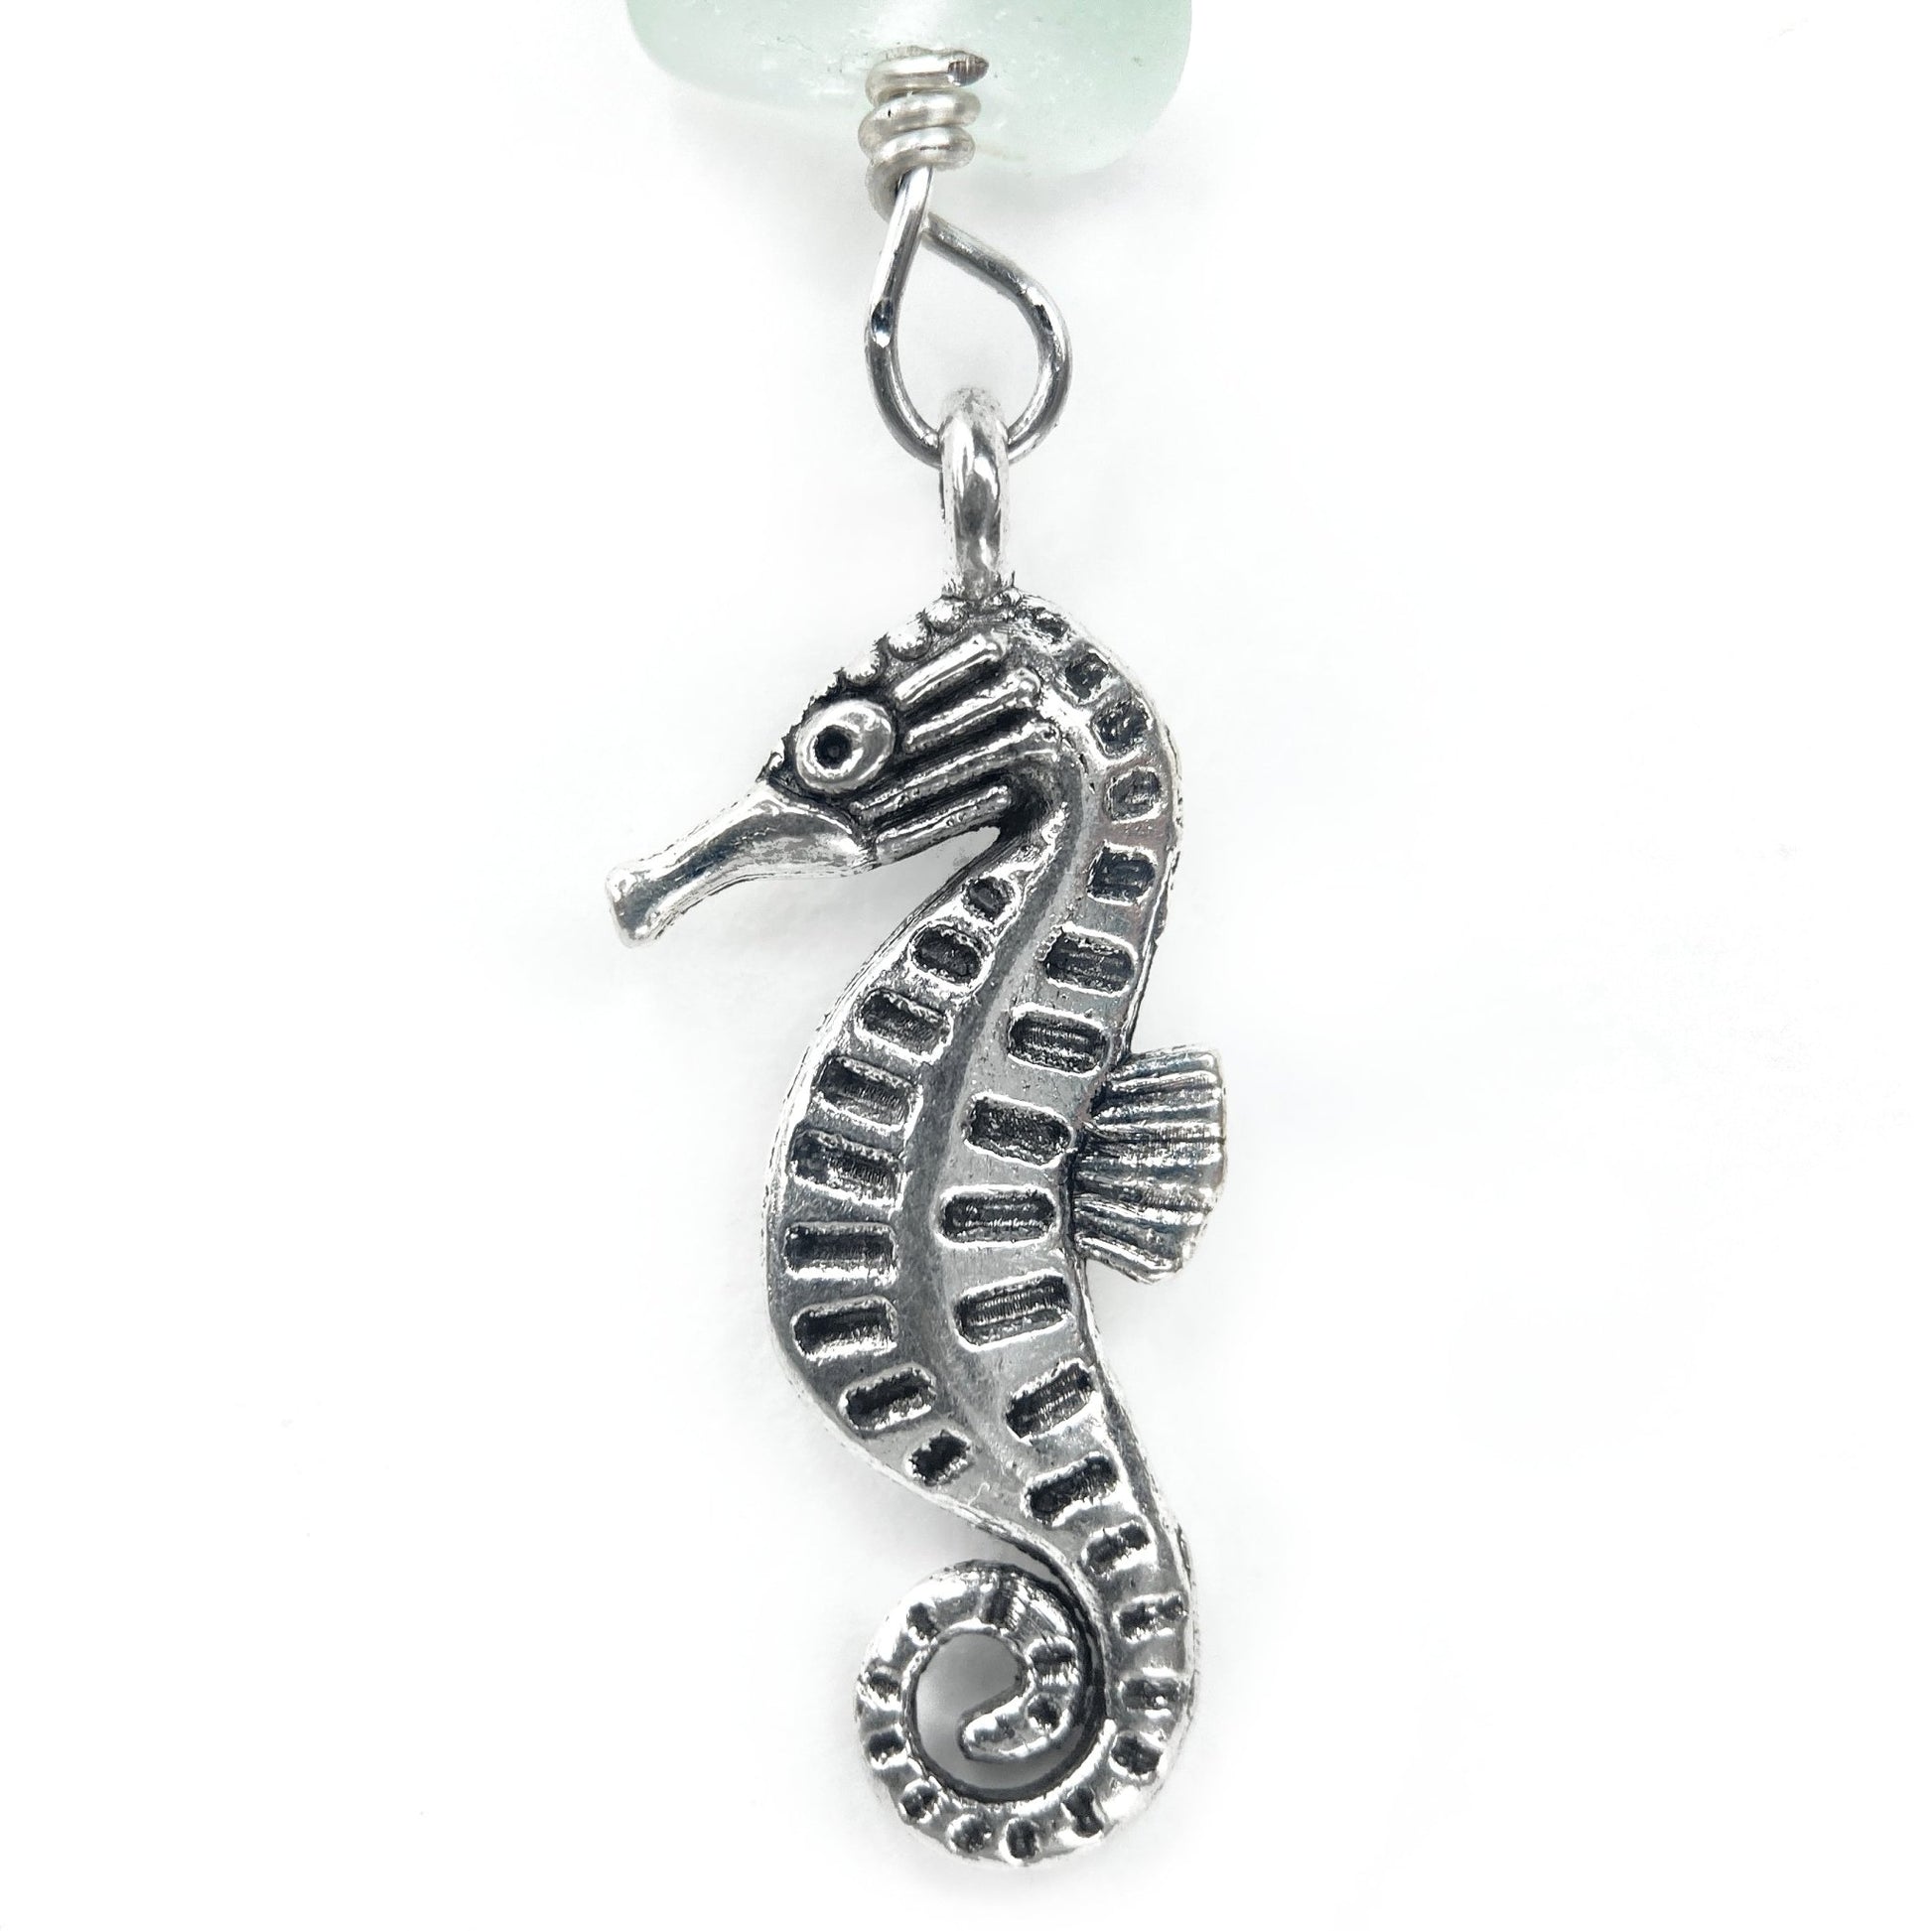 Seahorse Earrings - Green Sea Glass & Silver Jewellery with Amazonite Crystal Beads - East Neuk Beach Crafts